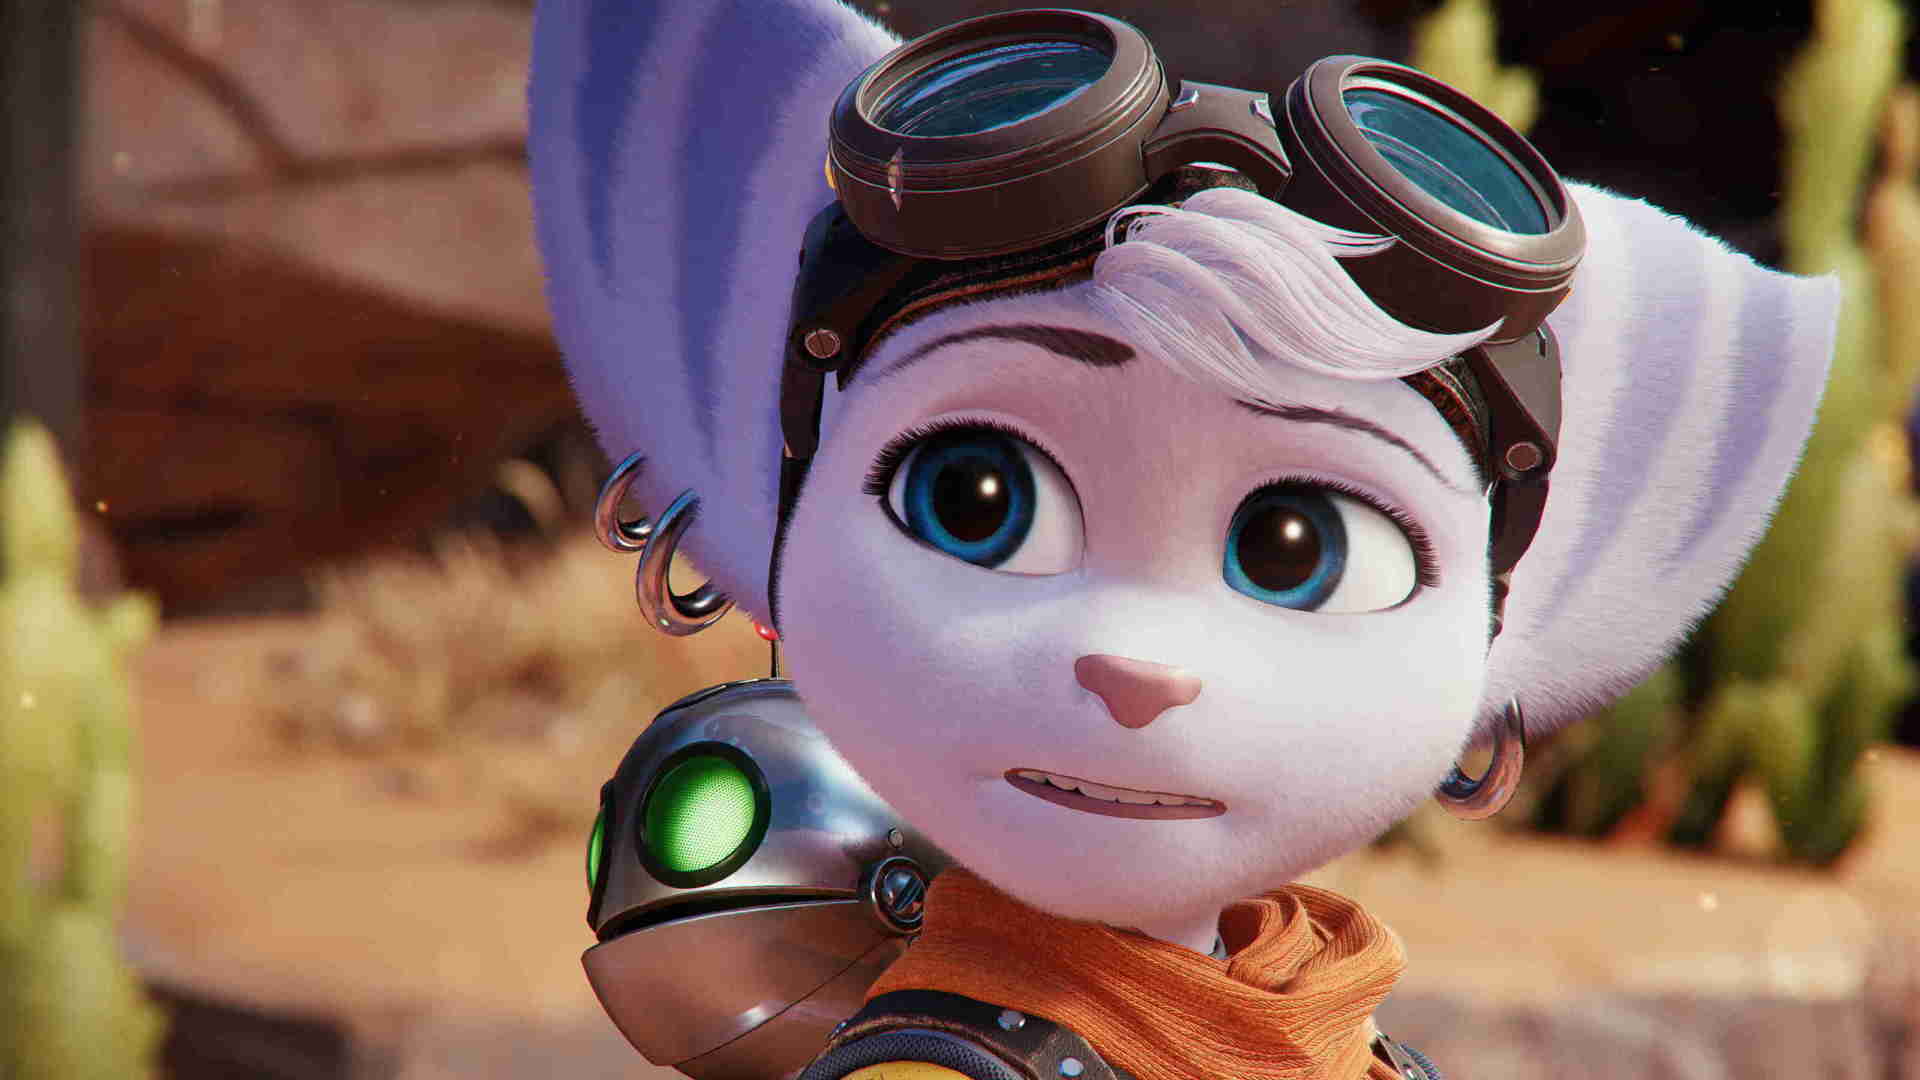 Ratchet & Clank: Rift Apart is coming to PC in July